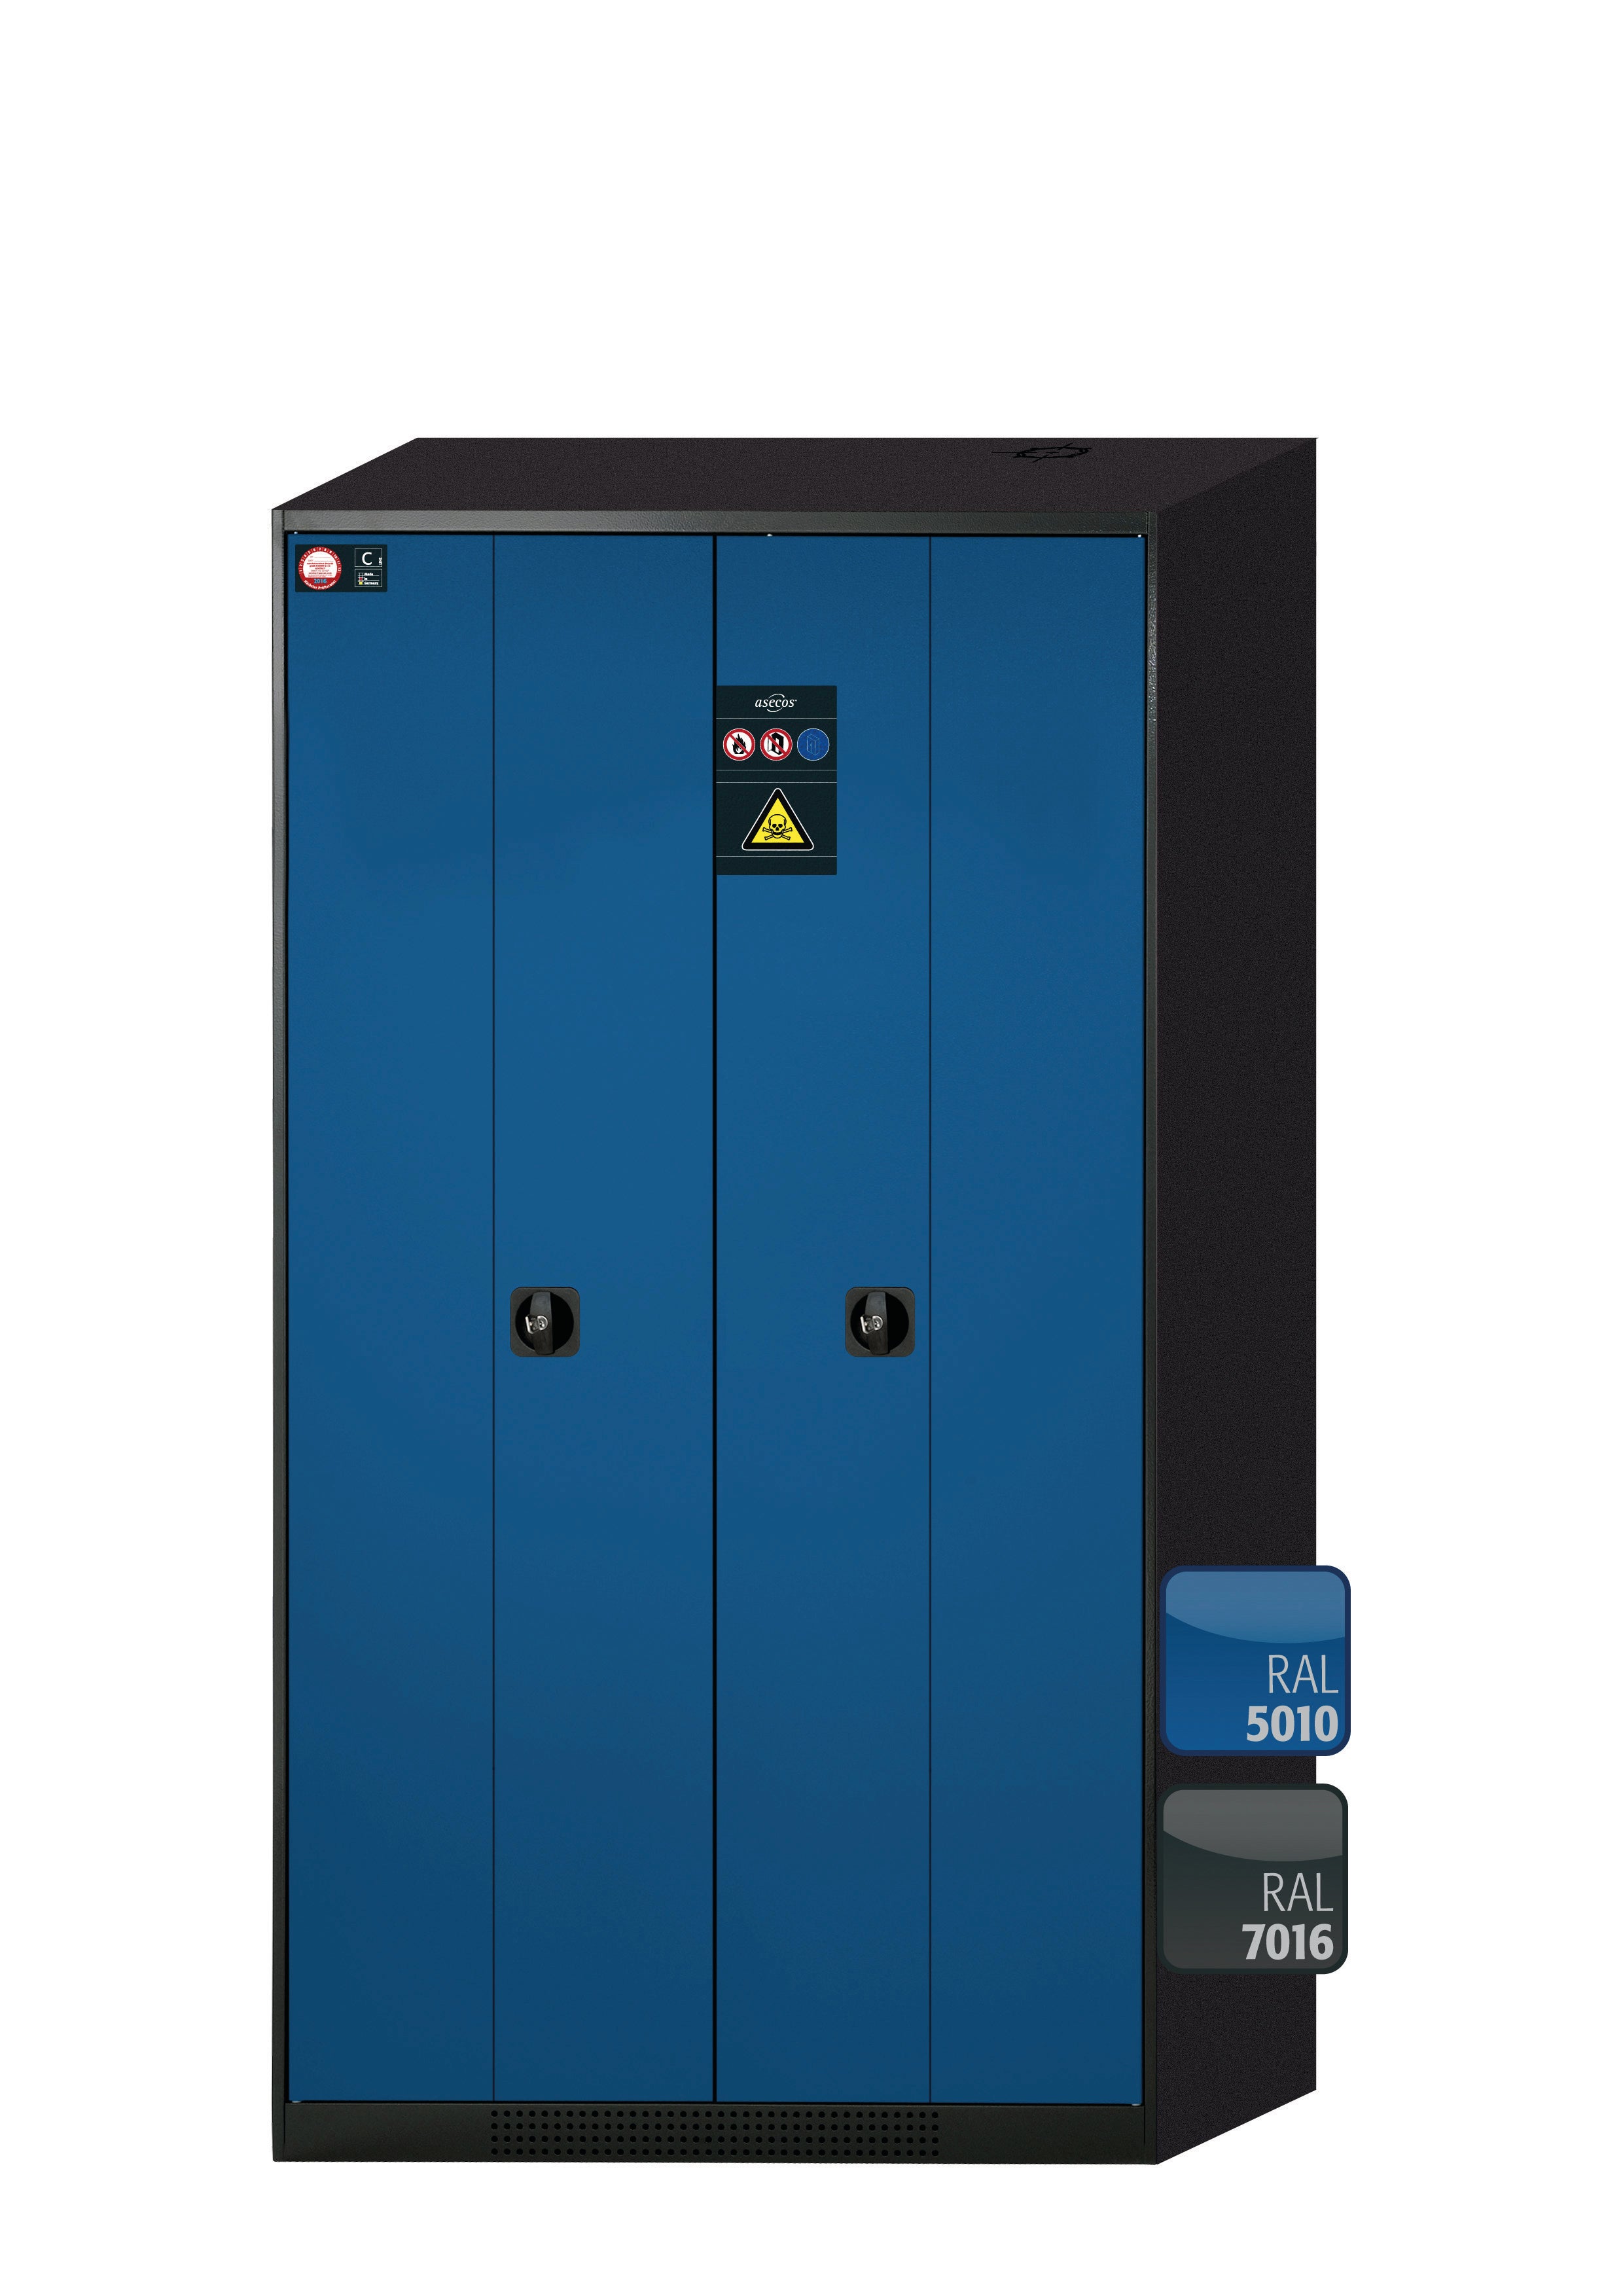 Chemical cabinet CS-PHOENIX model CS.195.105.FD in gentian blue RAL 5010 with 6x AbZ pull-out shelves (sheet steel/polypropylene)